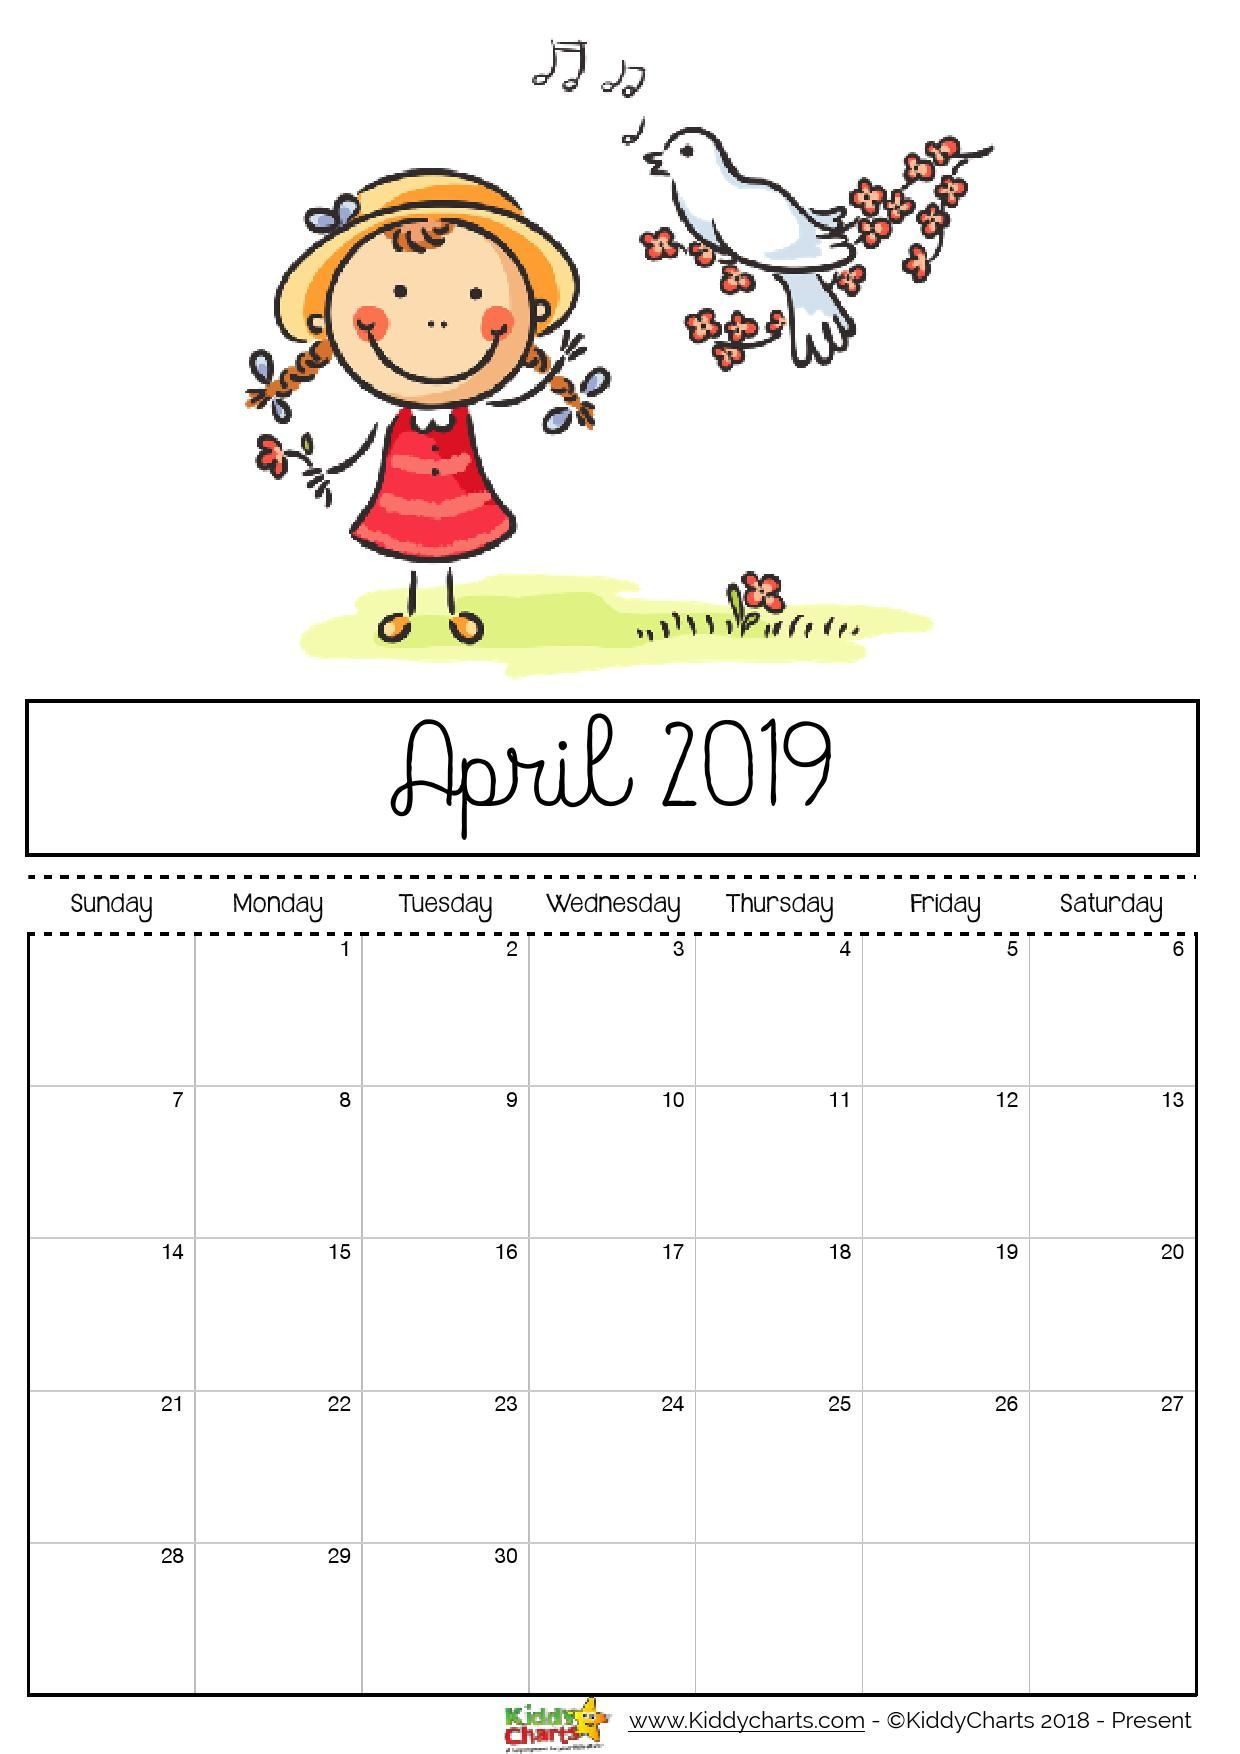 Check Out Our Fantastic Free 2019 Calendar For Your Child&#039;s